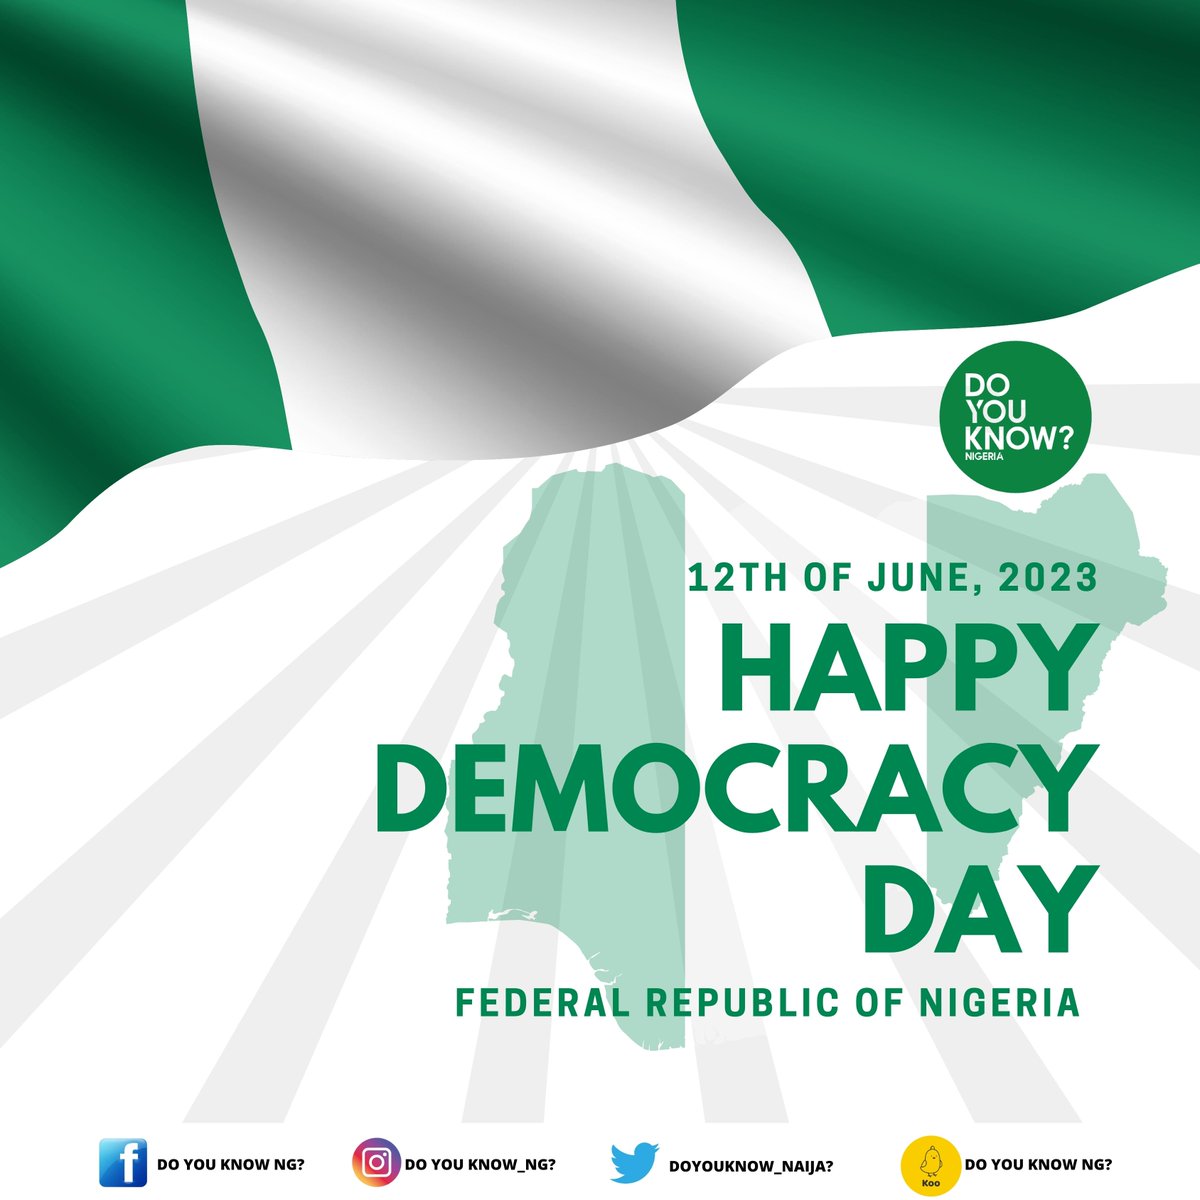 Happy Democracy Day, Nigeria! 

This momentous occasion serves as a tribute to the advancements and accomplishments we have attained in our democratic voyage. May we embrace the ideals of liberty, equality, and active engagement as we forge ahead towards a more promising future.